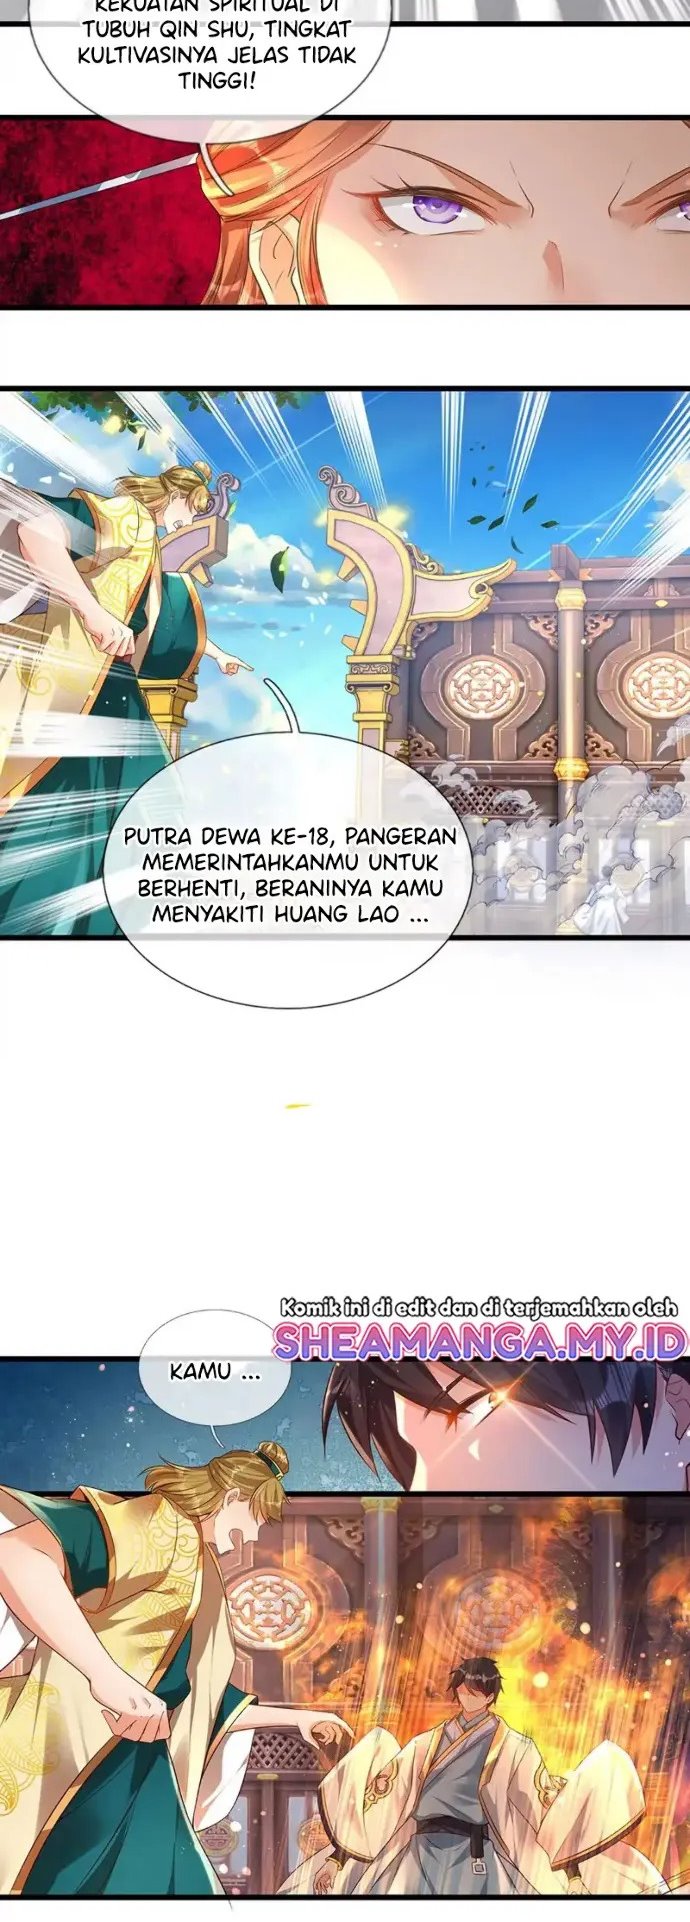 Star Sign In To Supreme Dantian Chapter 62